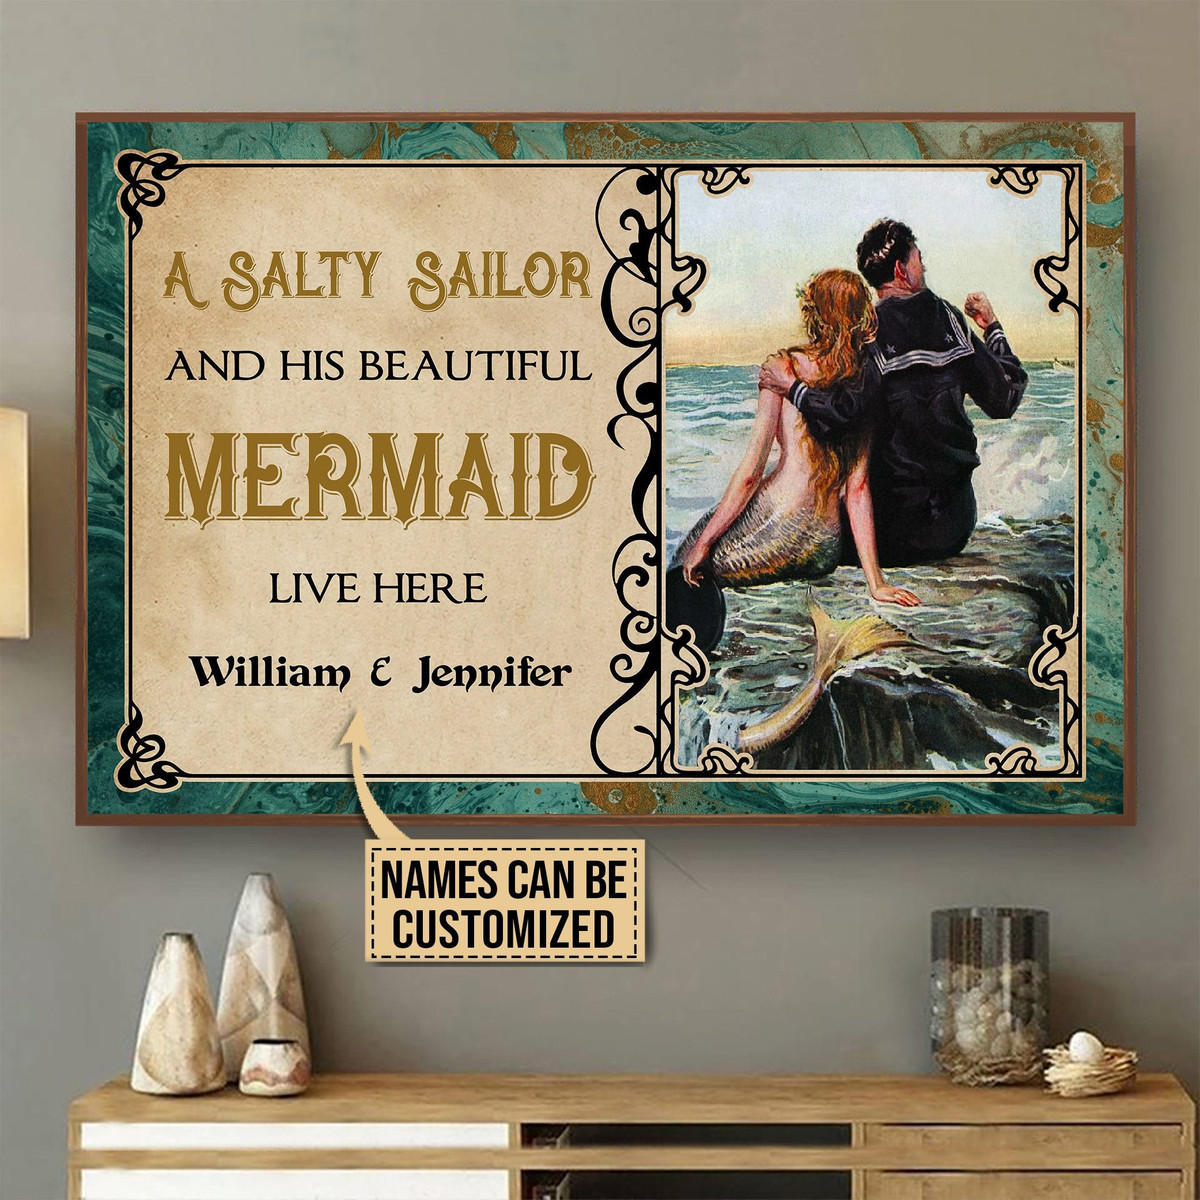 Aeticon Gifts Personalized Sailor And Mermaid Canvas Home Decor Wrapped Canvas 8x10